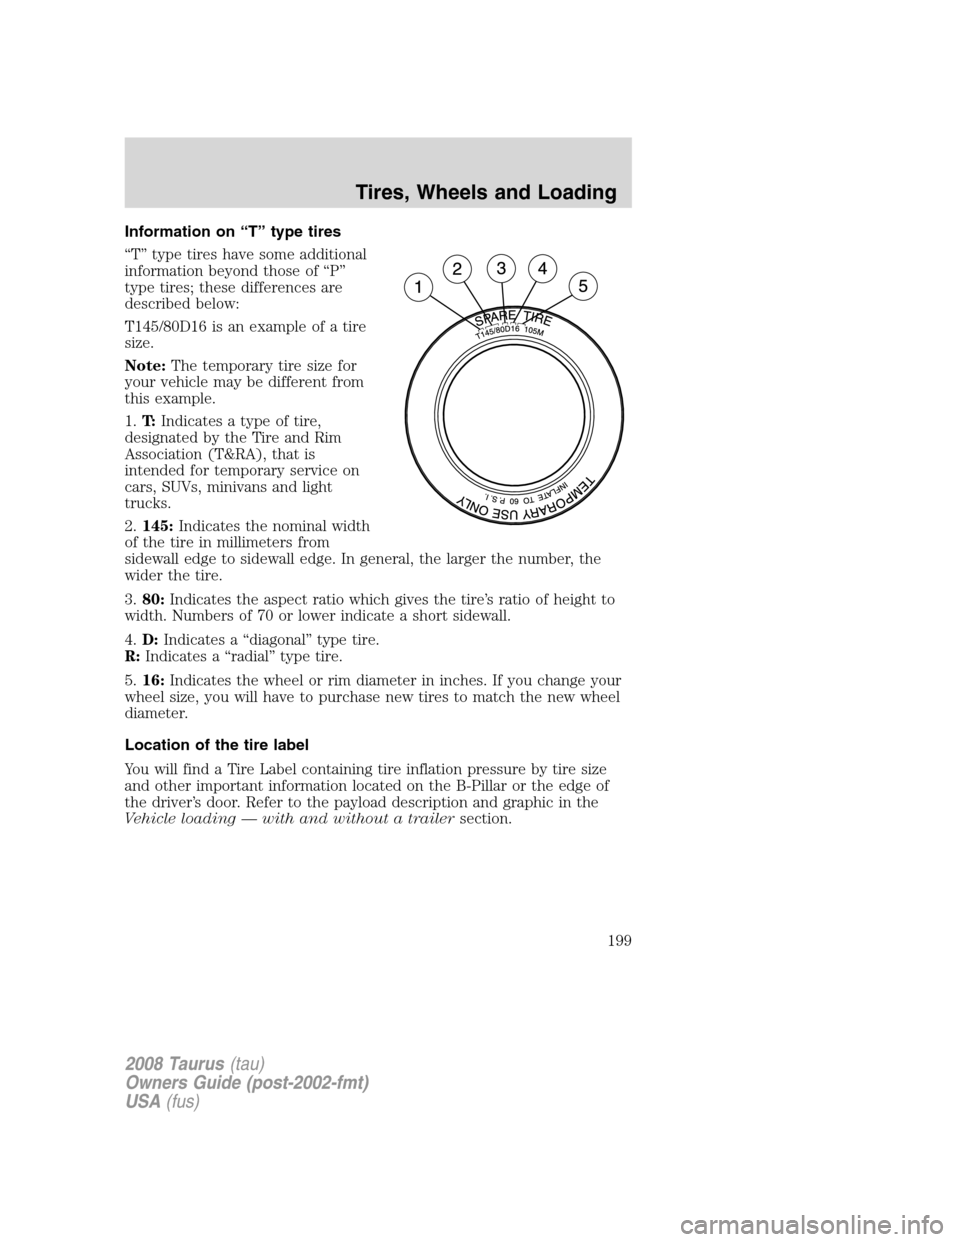 FORD TAURUS 2008 5.G Owners Manual Information on “T” type tires
“T” type tires have some additional
information beyond those of “P”
type tires; these differences are
described below:
T145/80D16 is an example of a tire
size